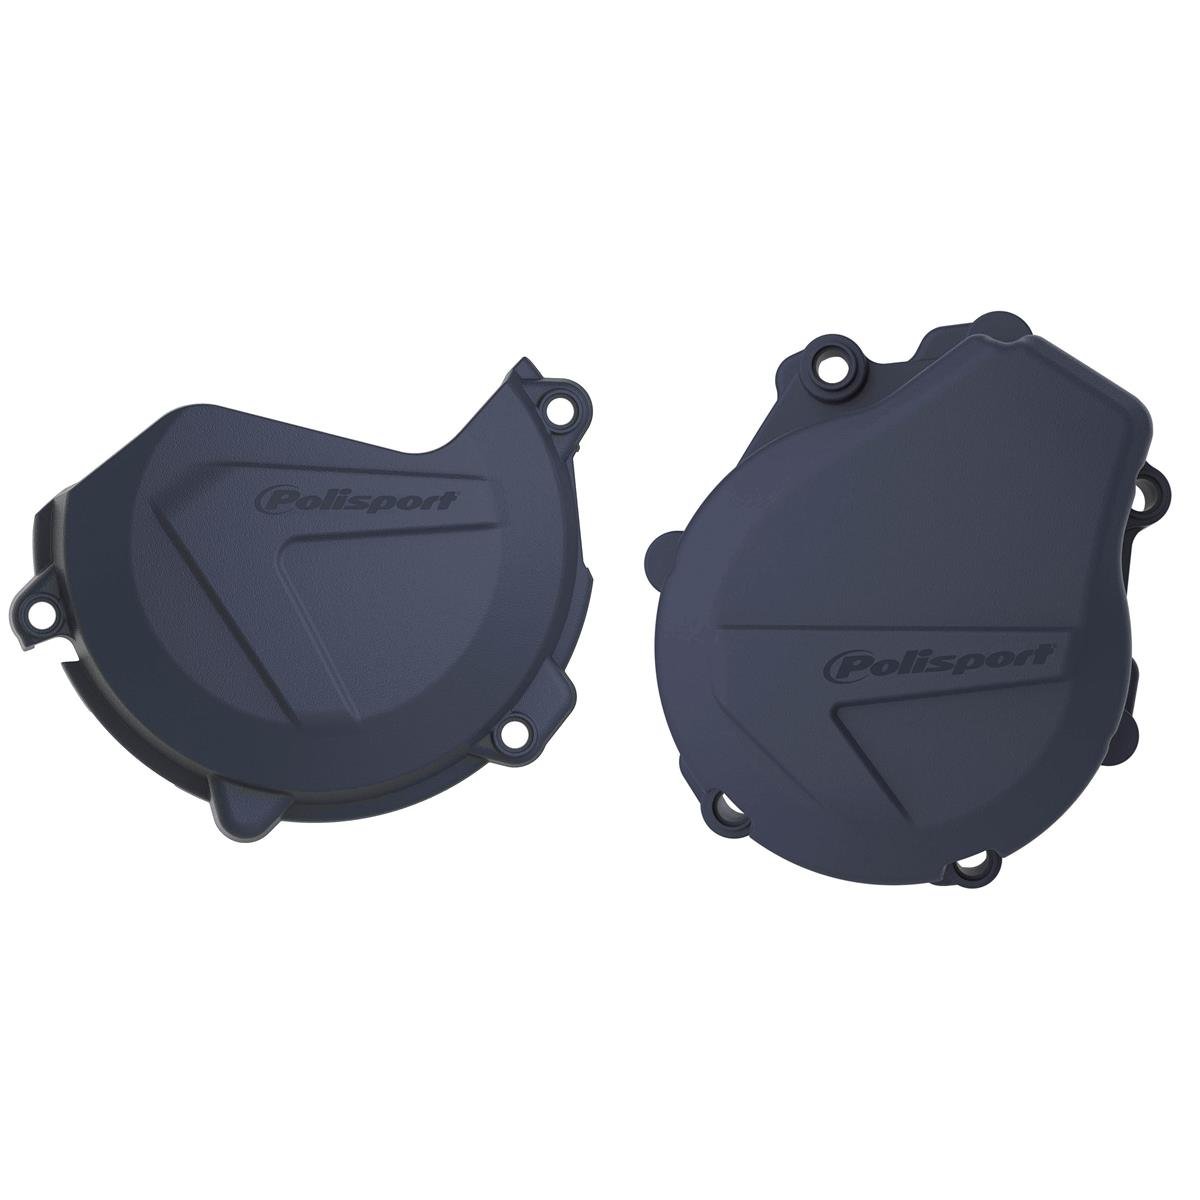 Polisport Clutch/Ignition Cover Protection  Husqvarna FE 450/501 17-20, Blue